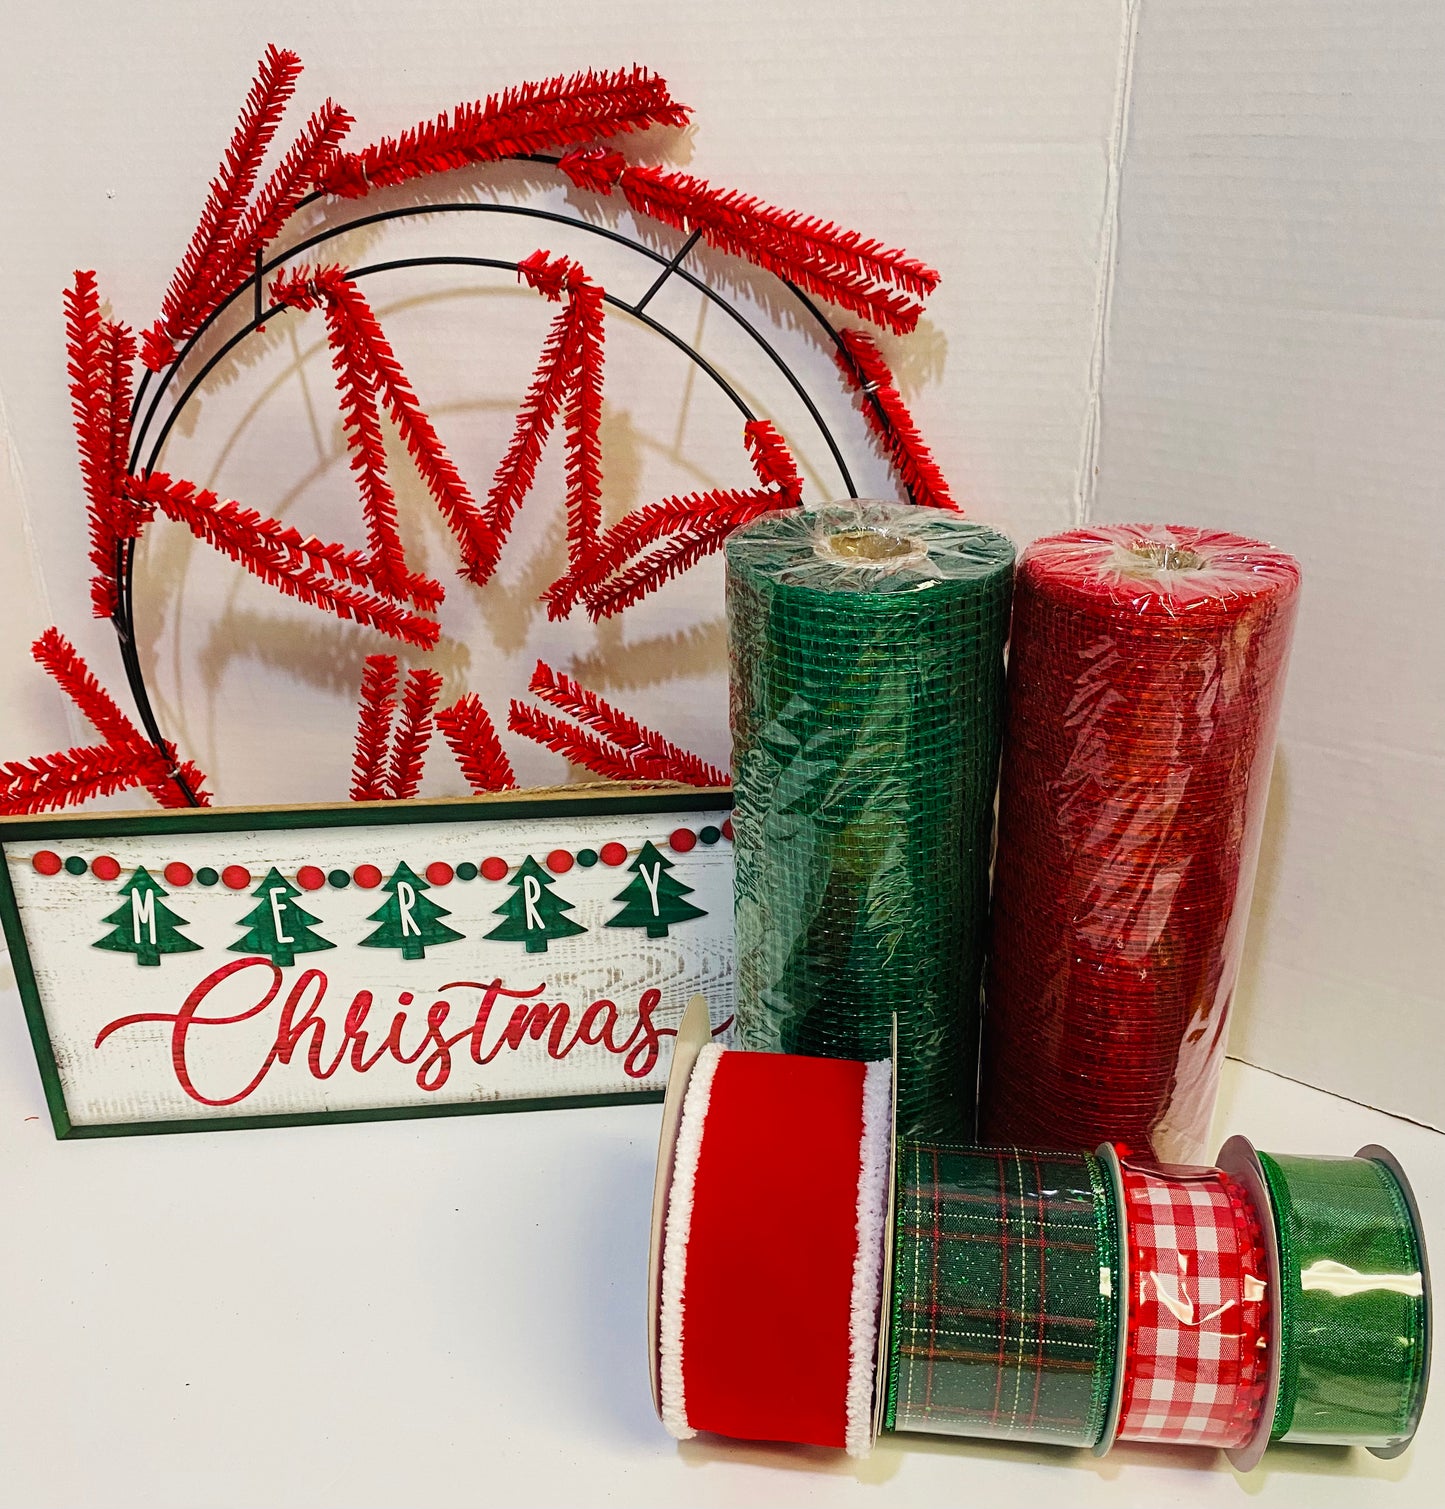 Classic Christmas Wreath Kit (Crafters Convention)